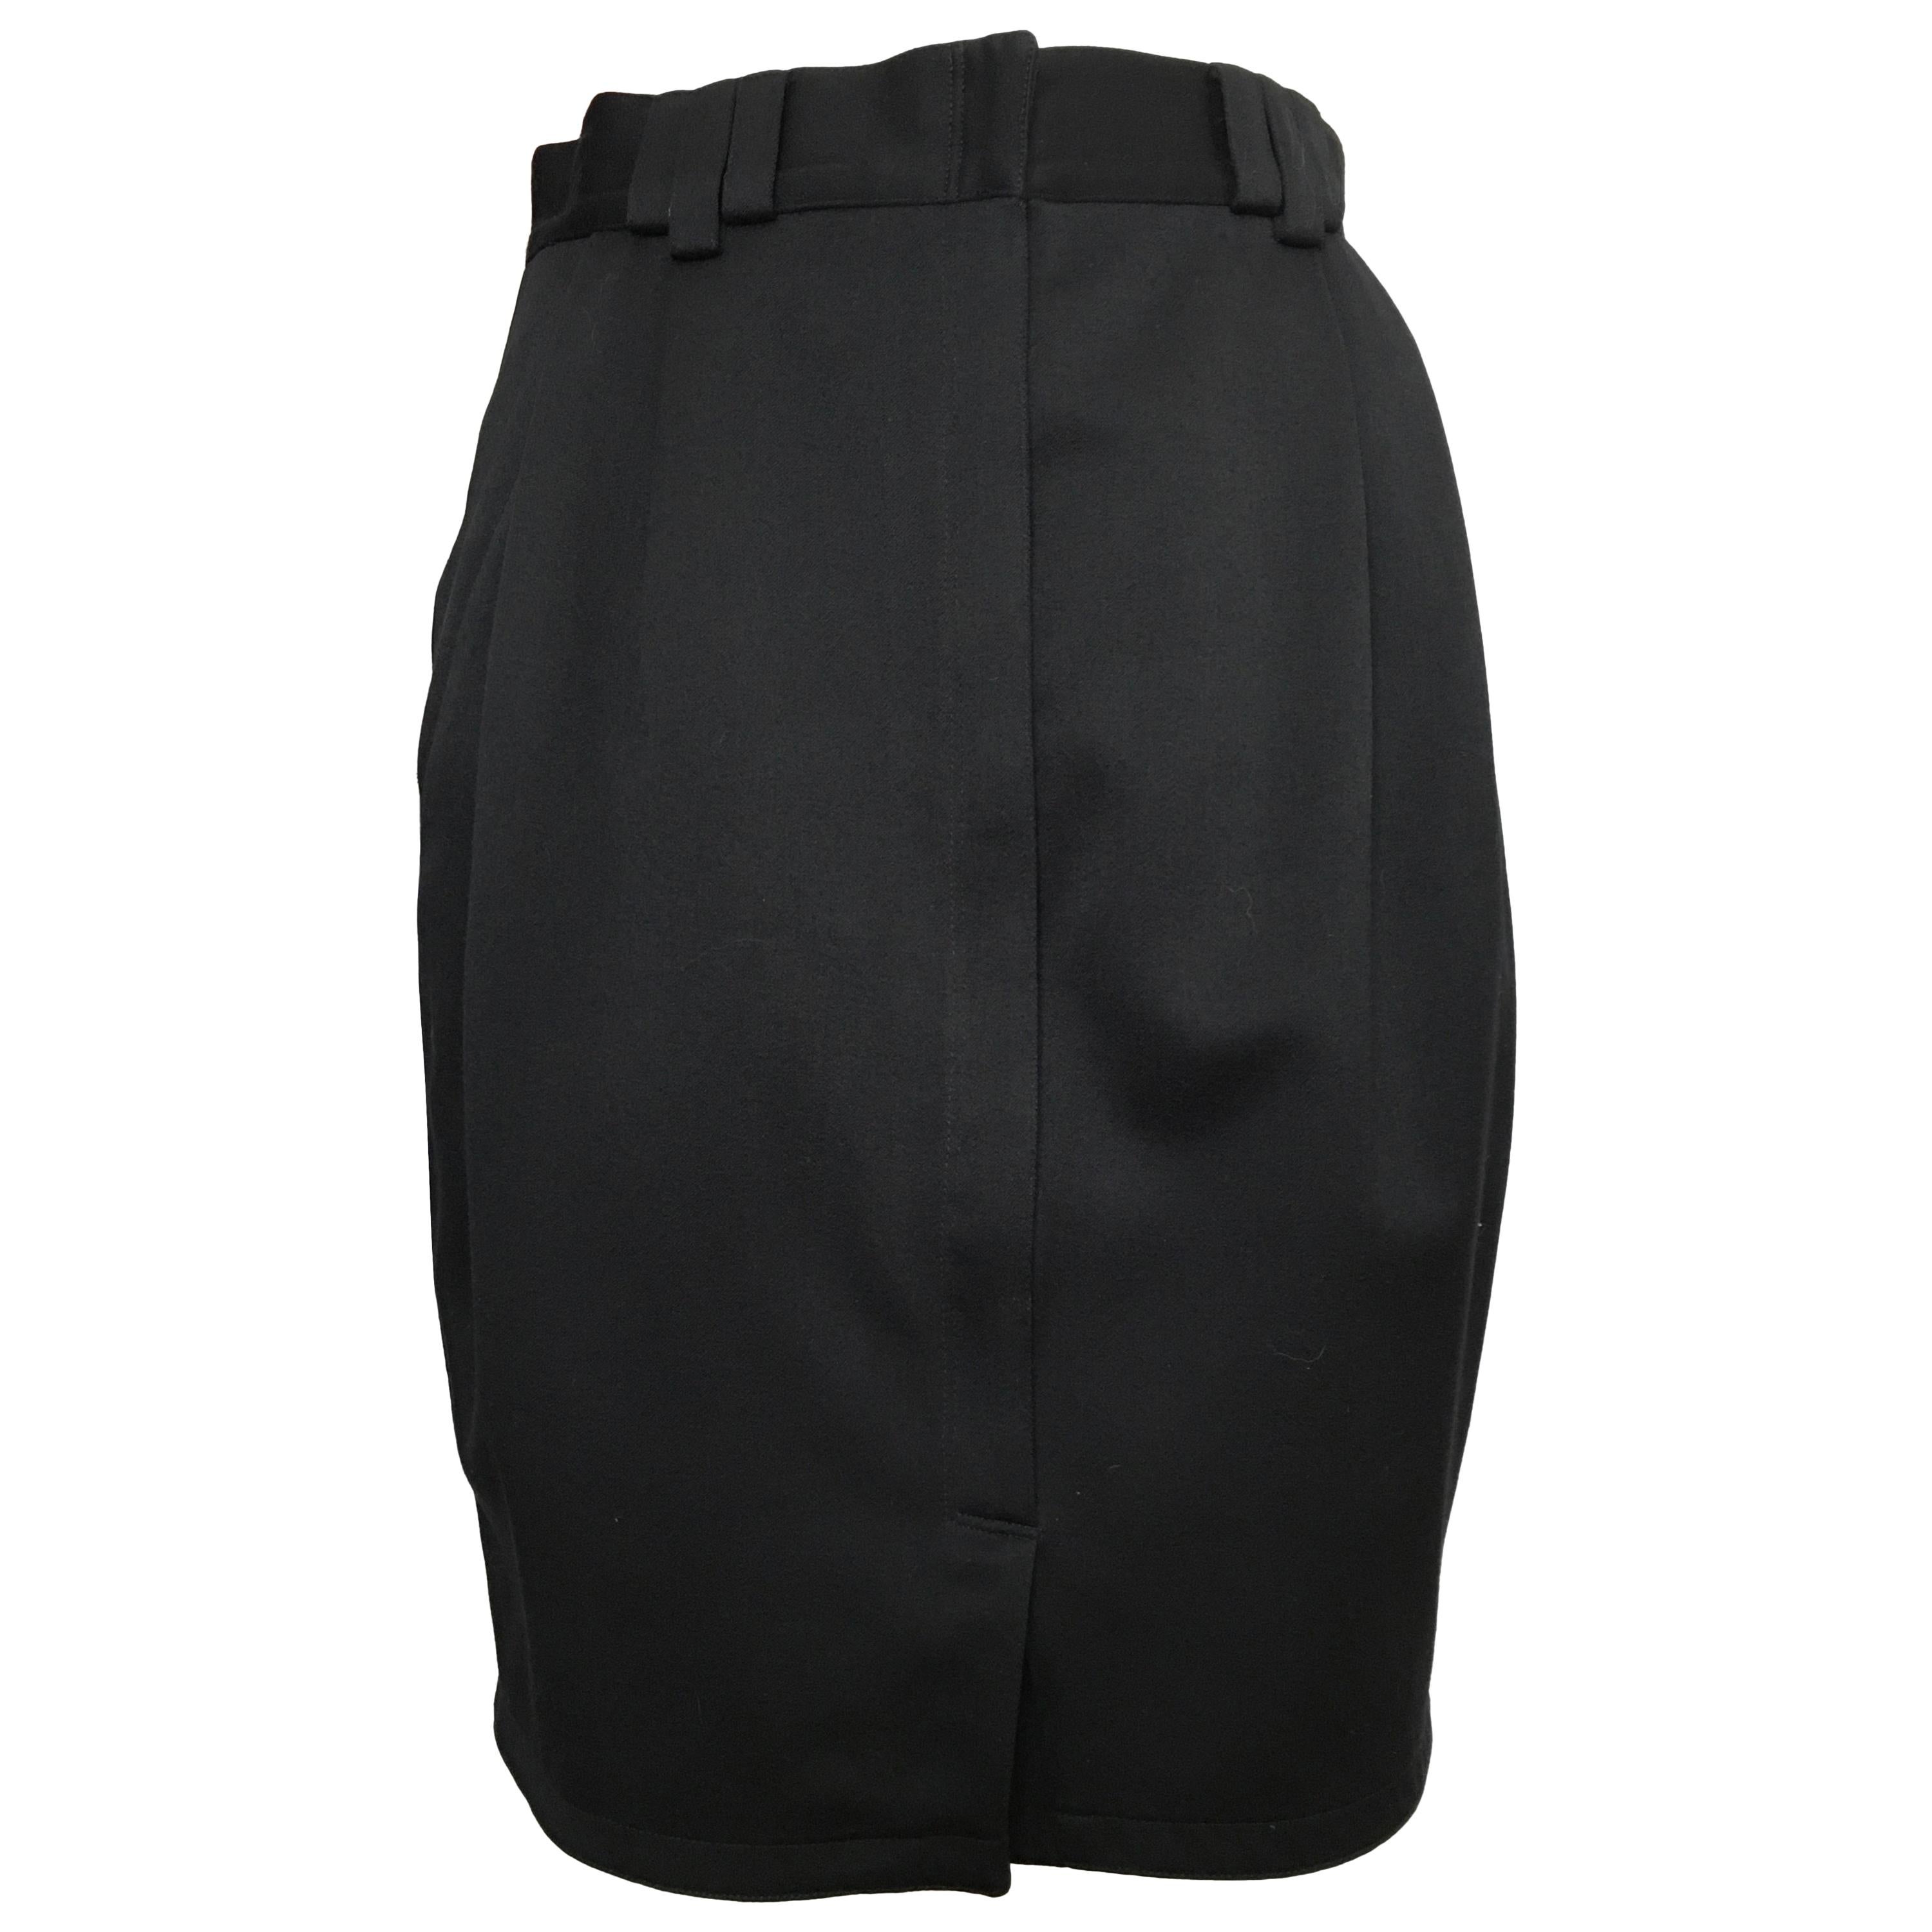 Gianni Versace 1980s Black Wool Skirt with Pockets Size 4.  For Sale